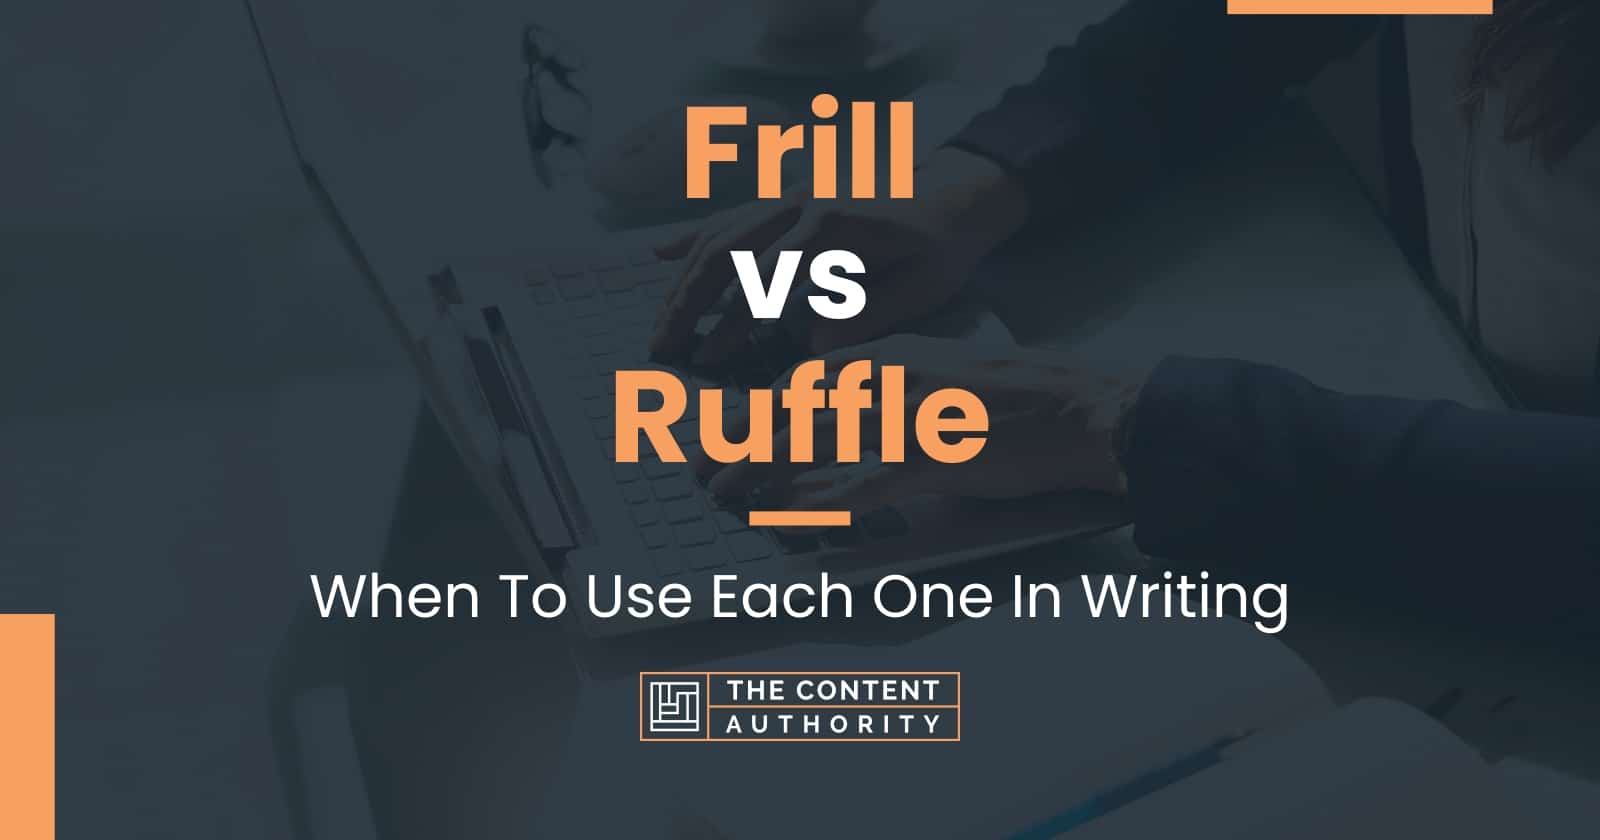 Frill vs Ruffle: When To Use Each One In Writing